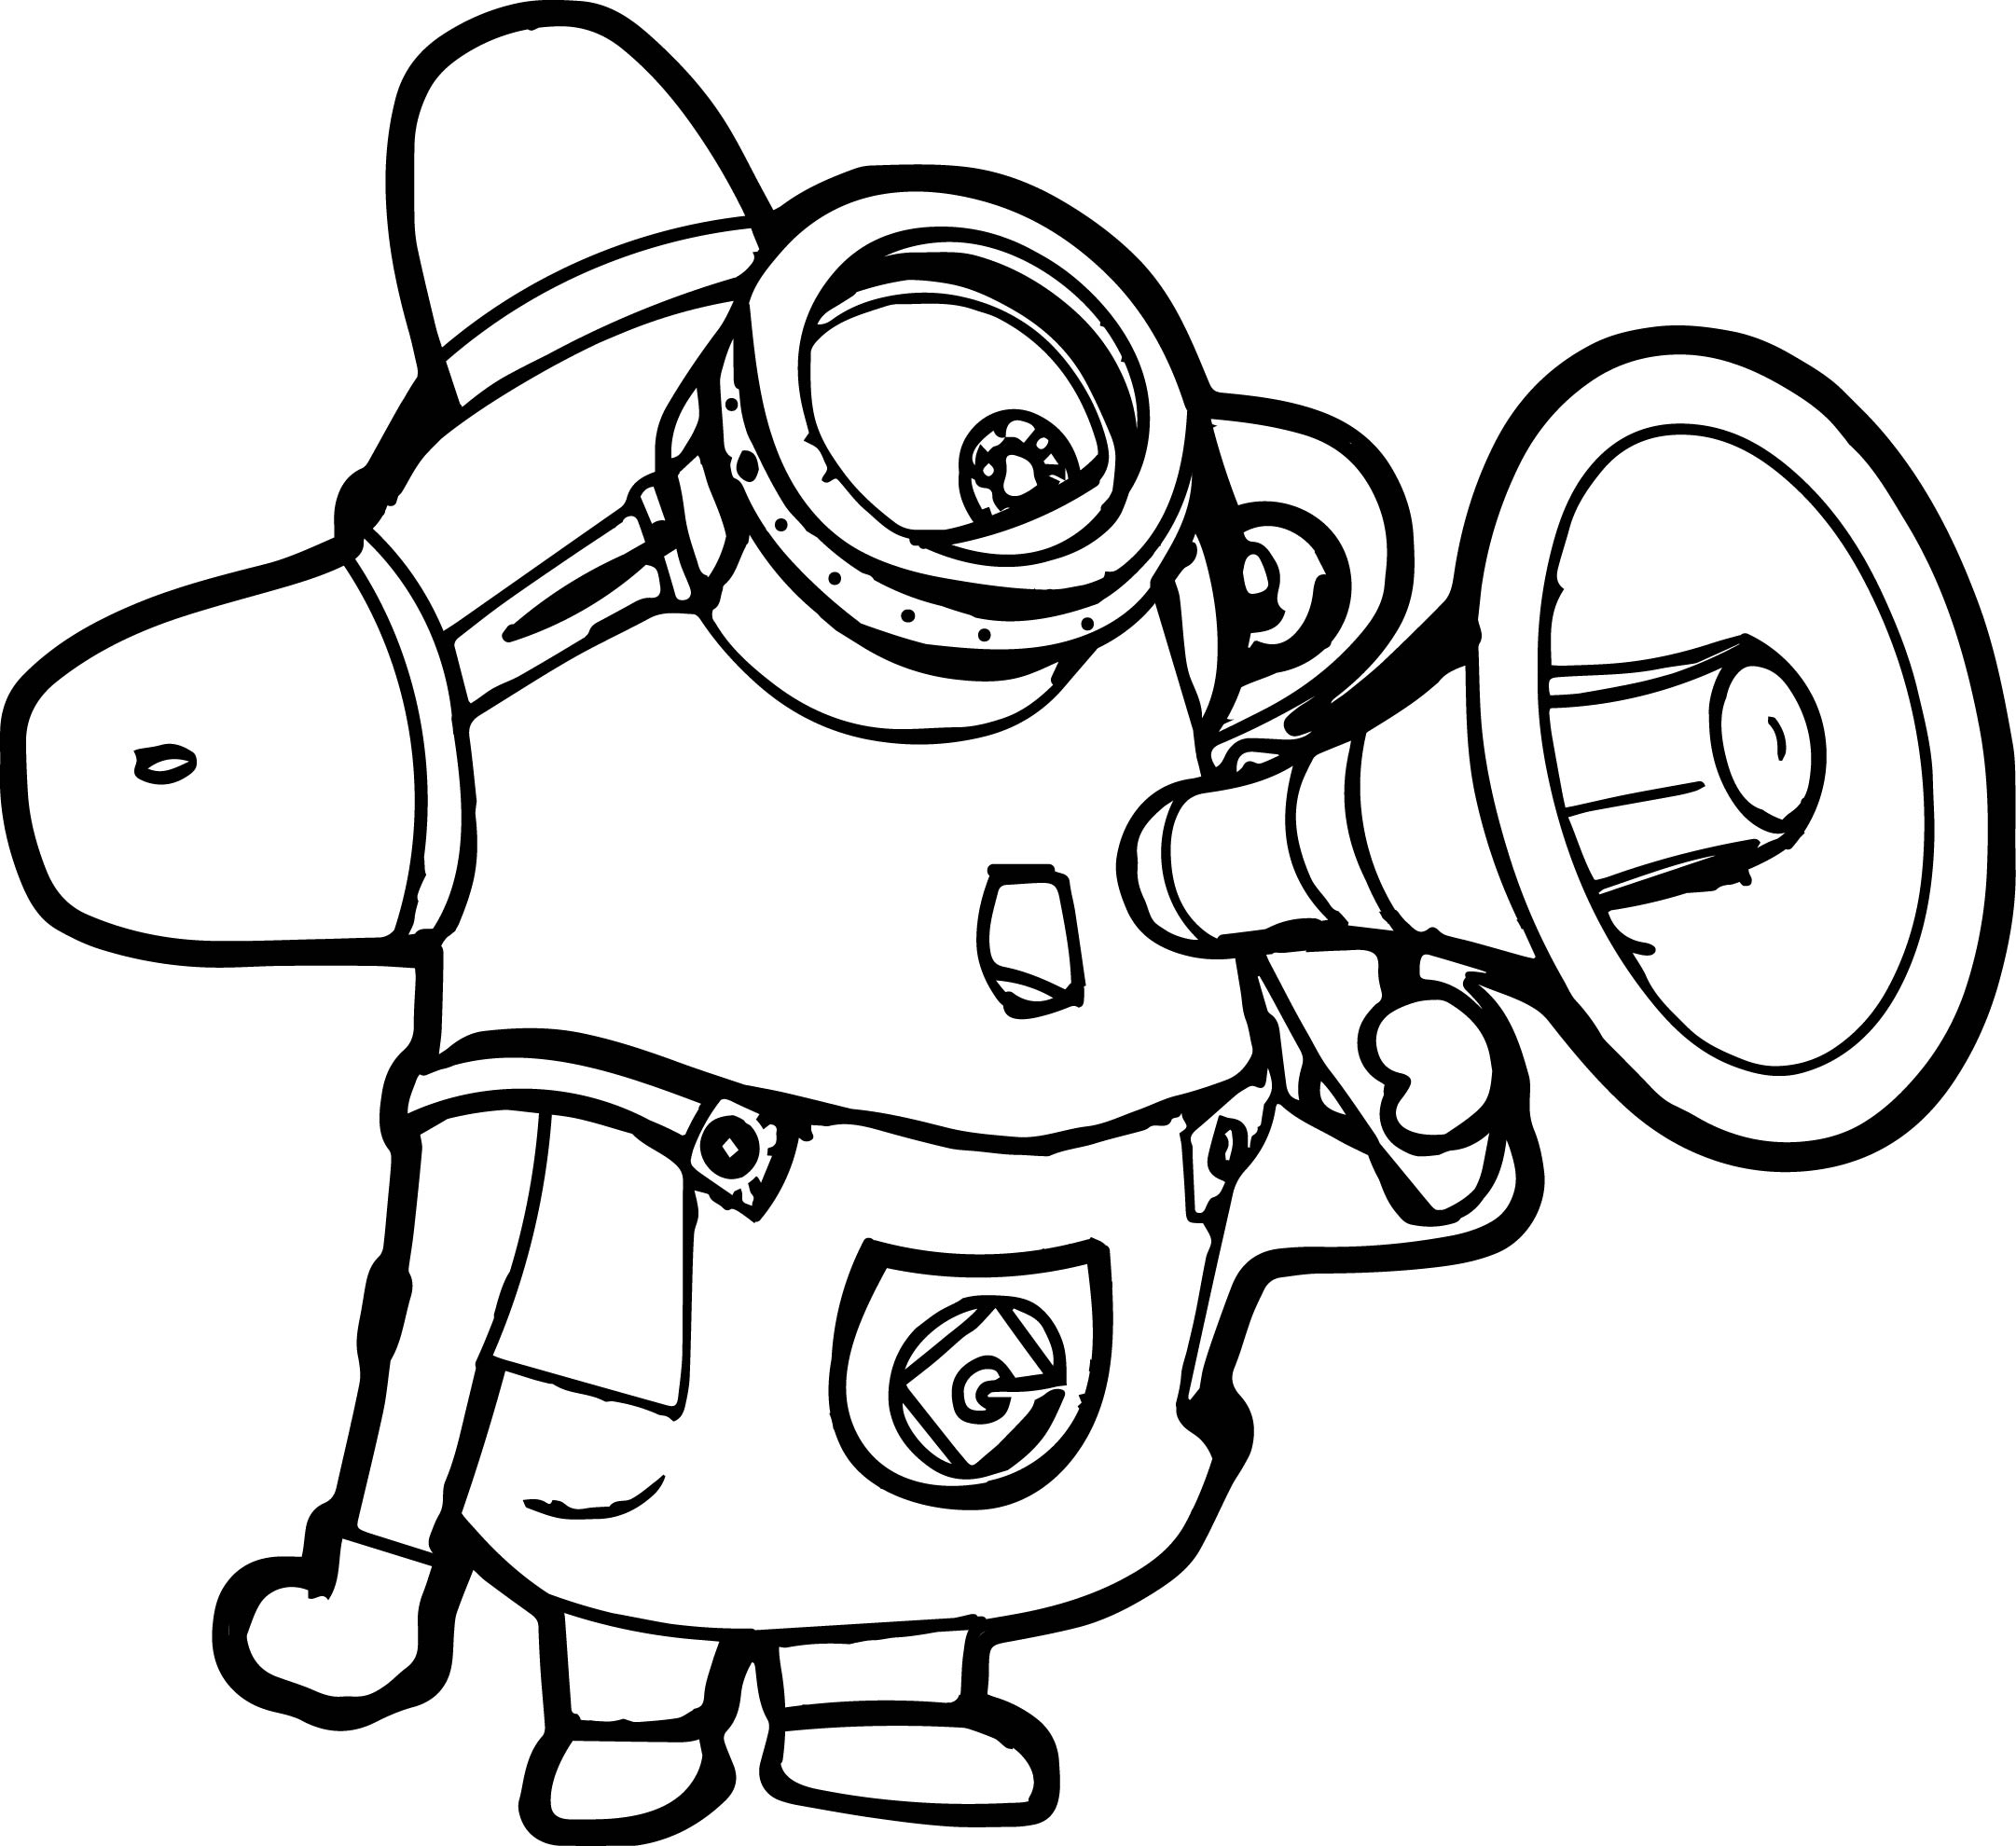 29-minion-coloring-pages-to-print-for-free